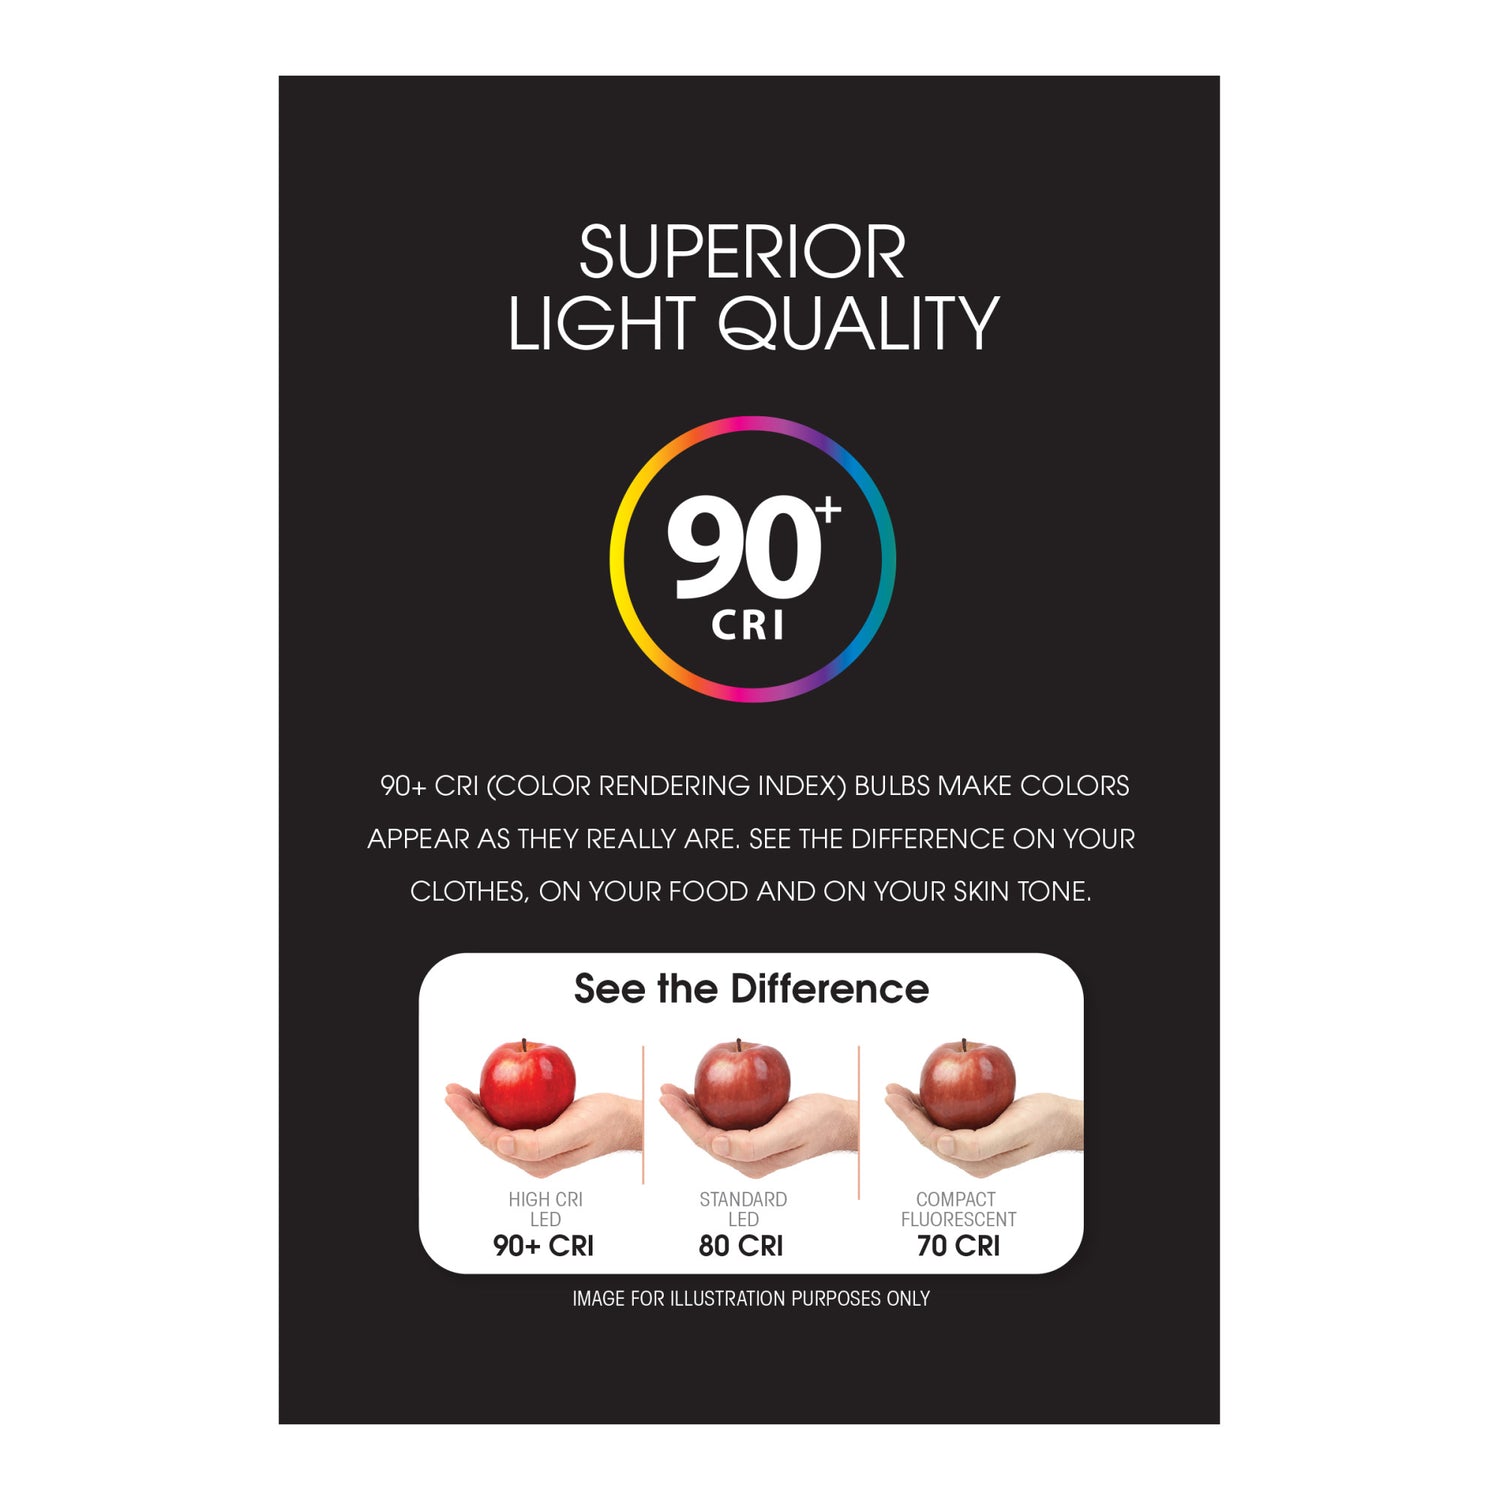 800 Lumens 3000K Dimmable LED